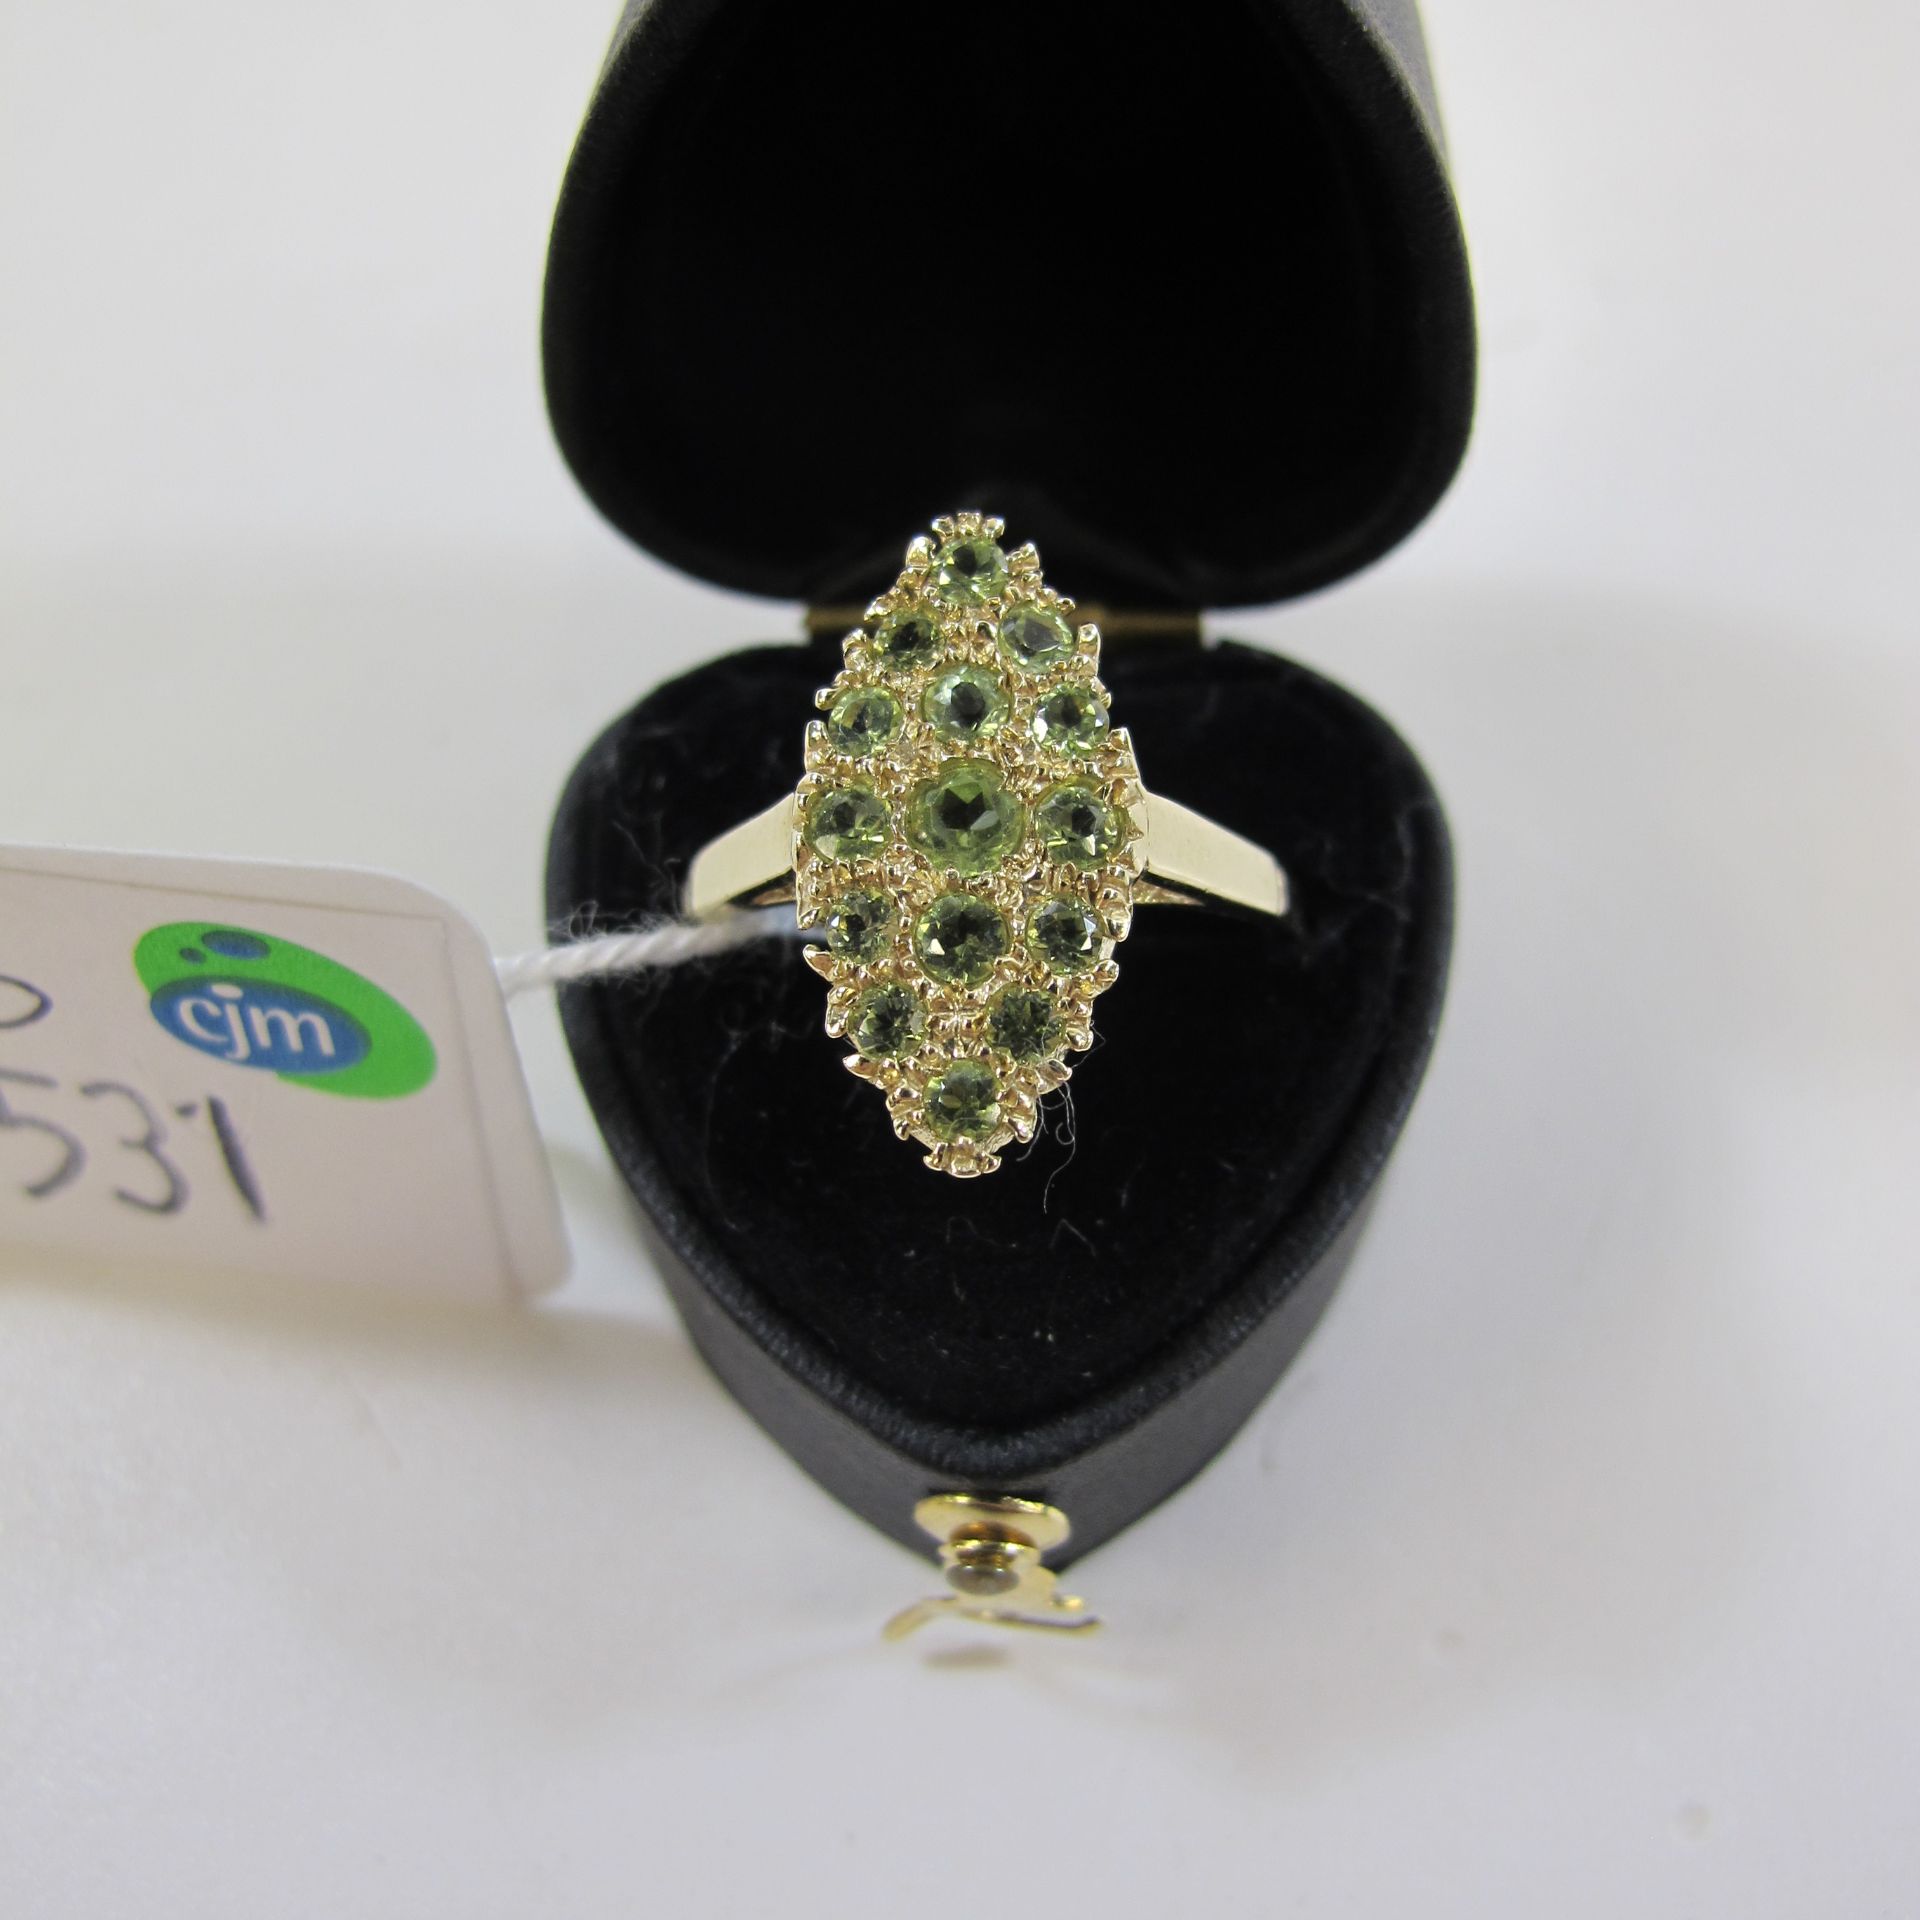 Victorian Marquise-style 9ct Gold Peridot Set Ring - size O (est £60-£120)